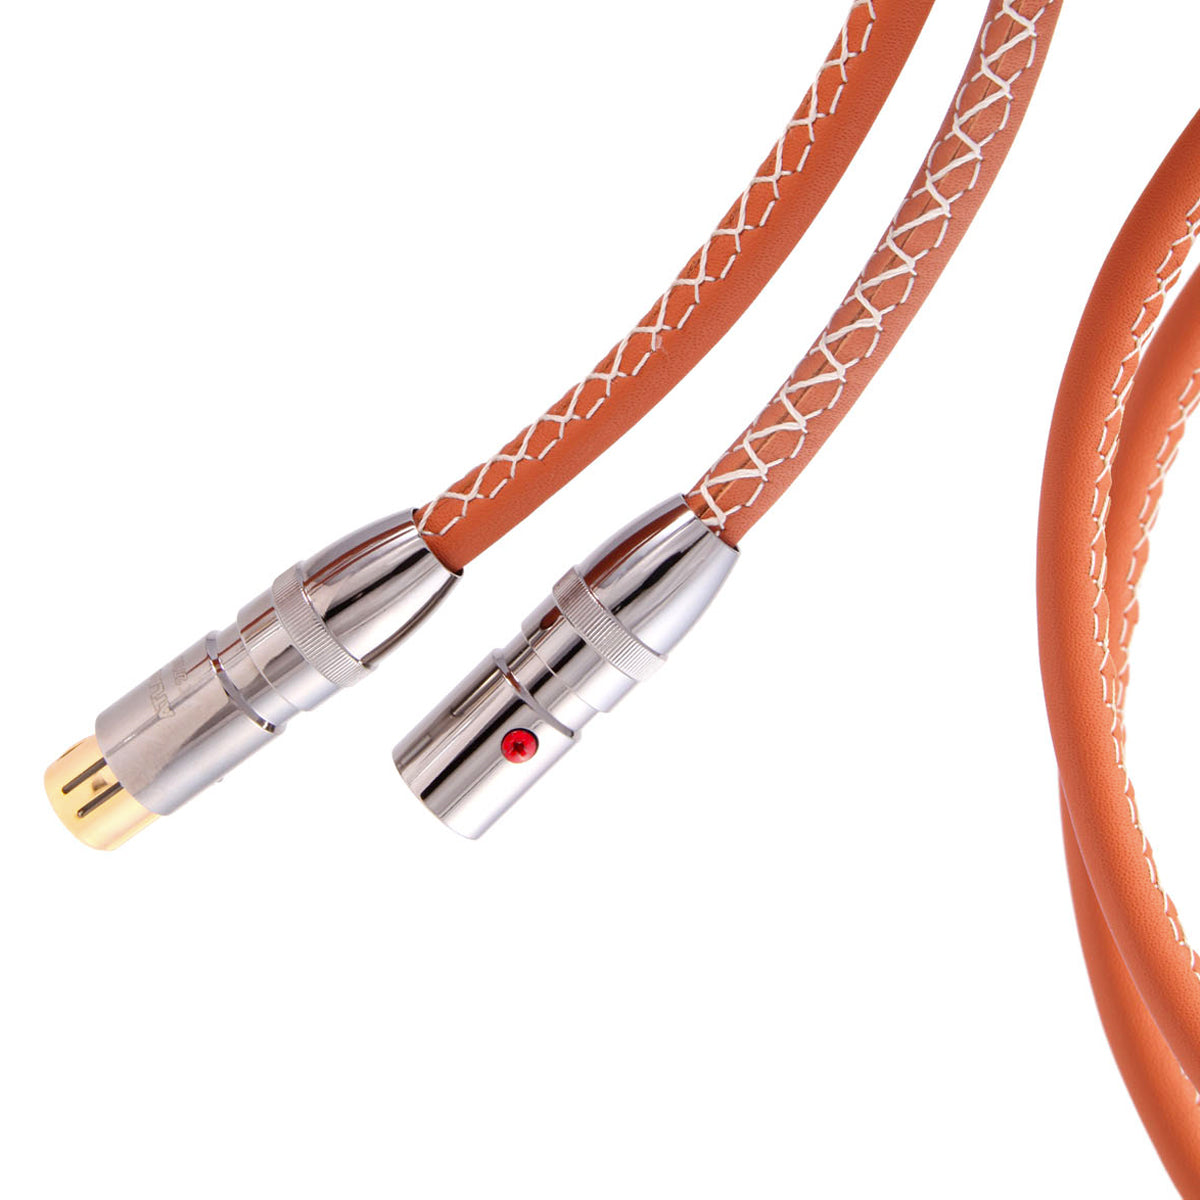 ATLAS Asimi OCC XLR LUXE Interconnect Cable - The Audio Experts